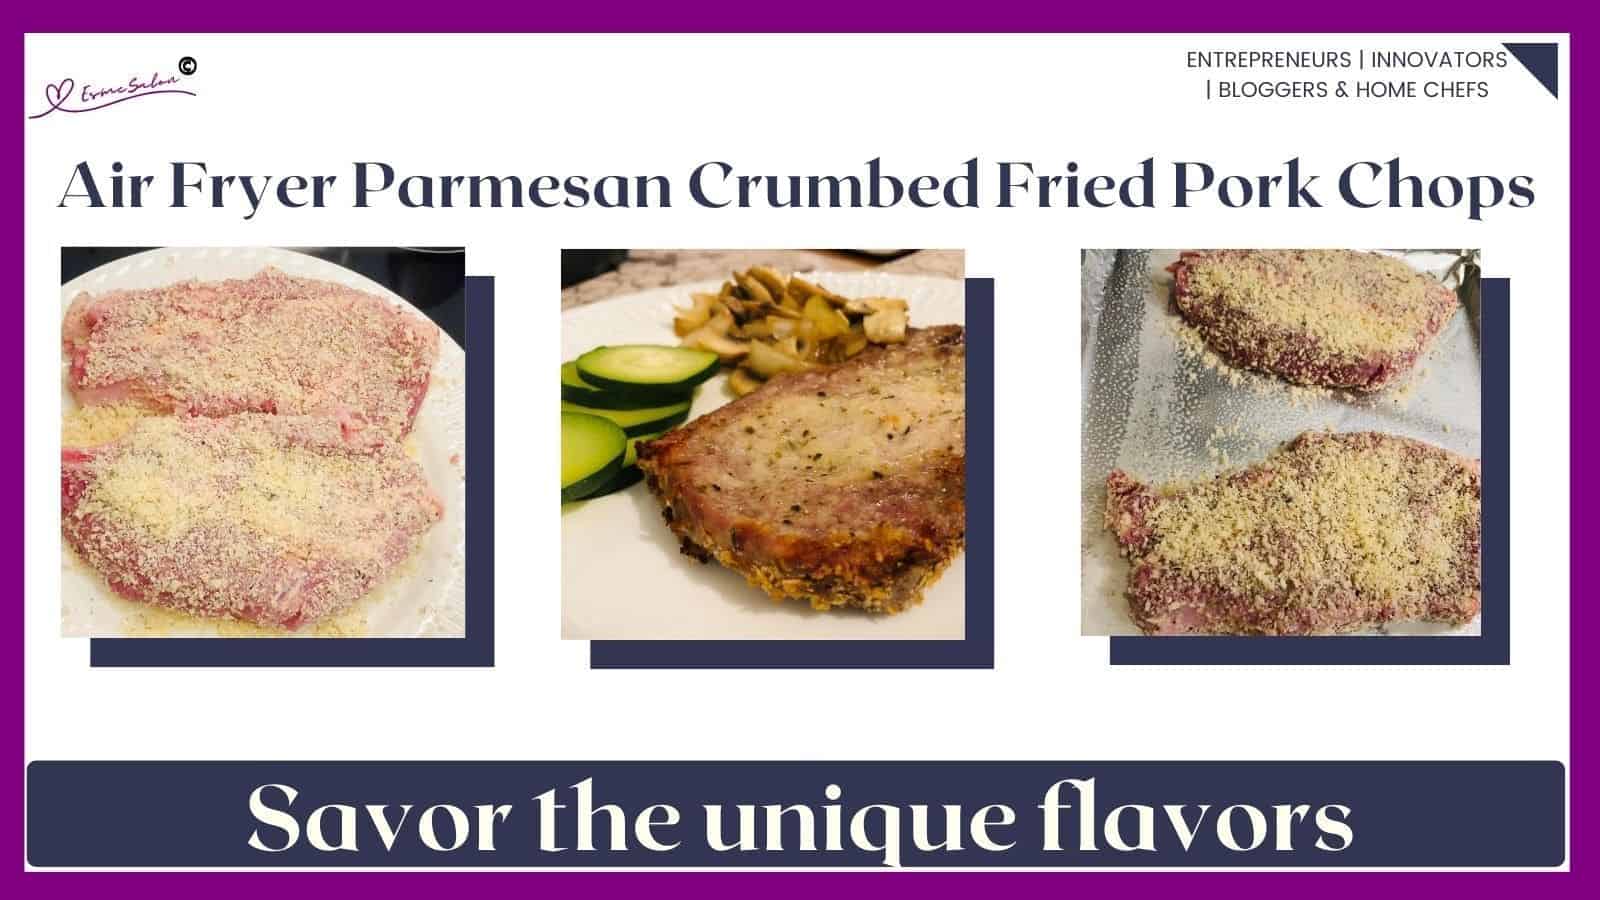 An image of Air Fryer Parmesan Crumbed Fried Pork Chops in the making and/or served mushrooms and courgette/zucchini